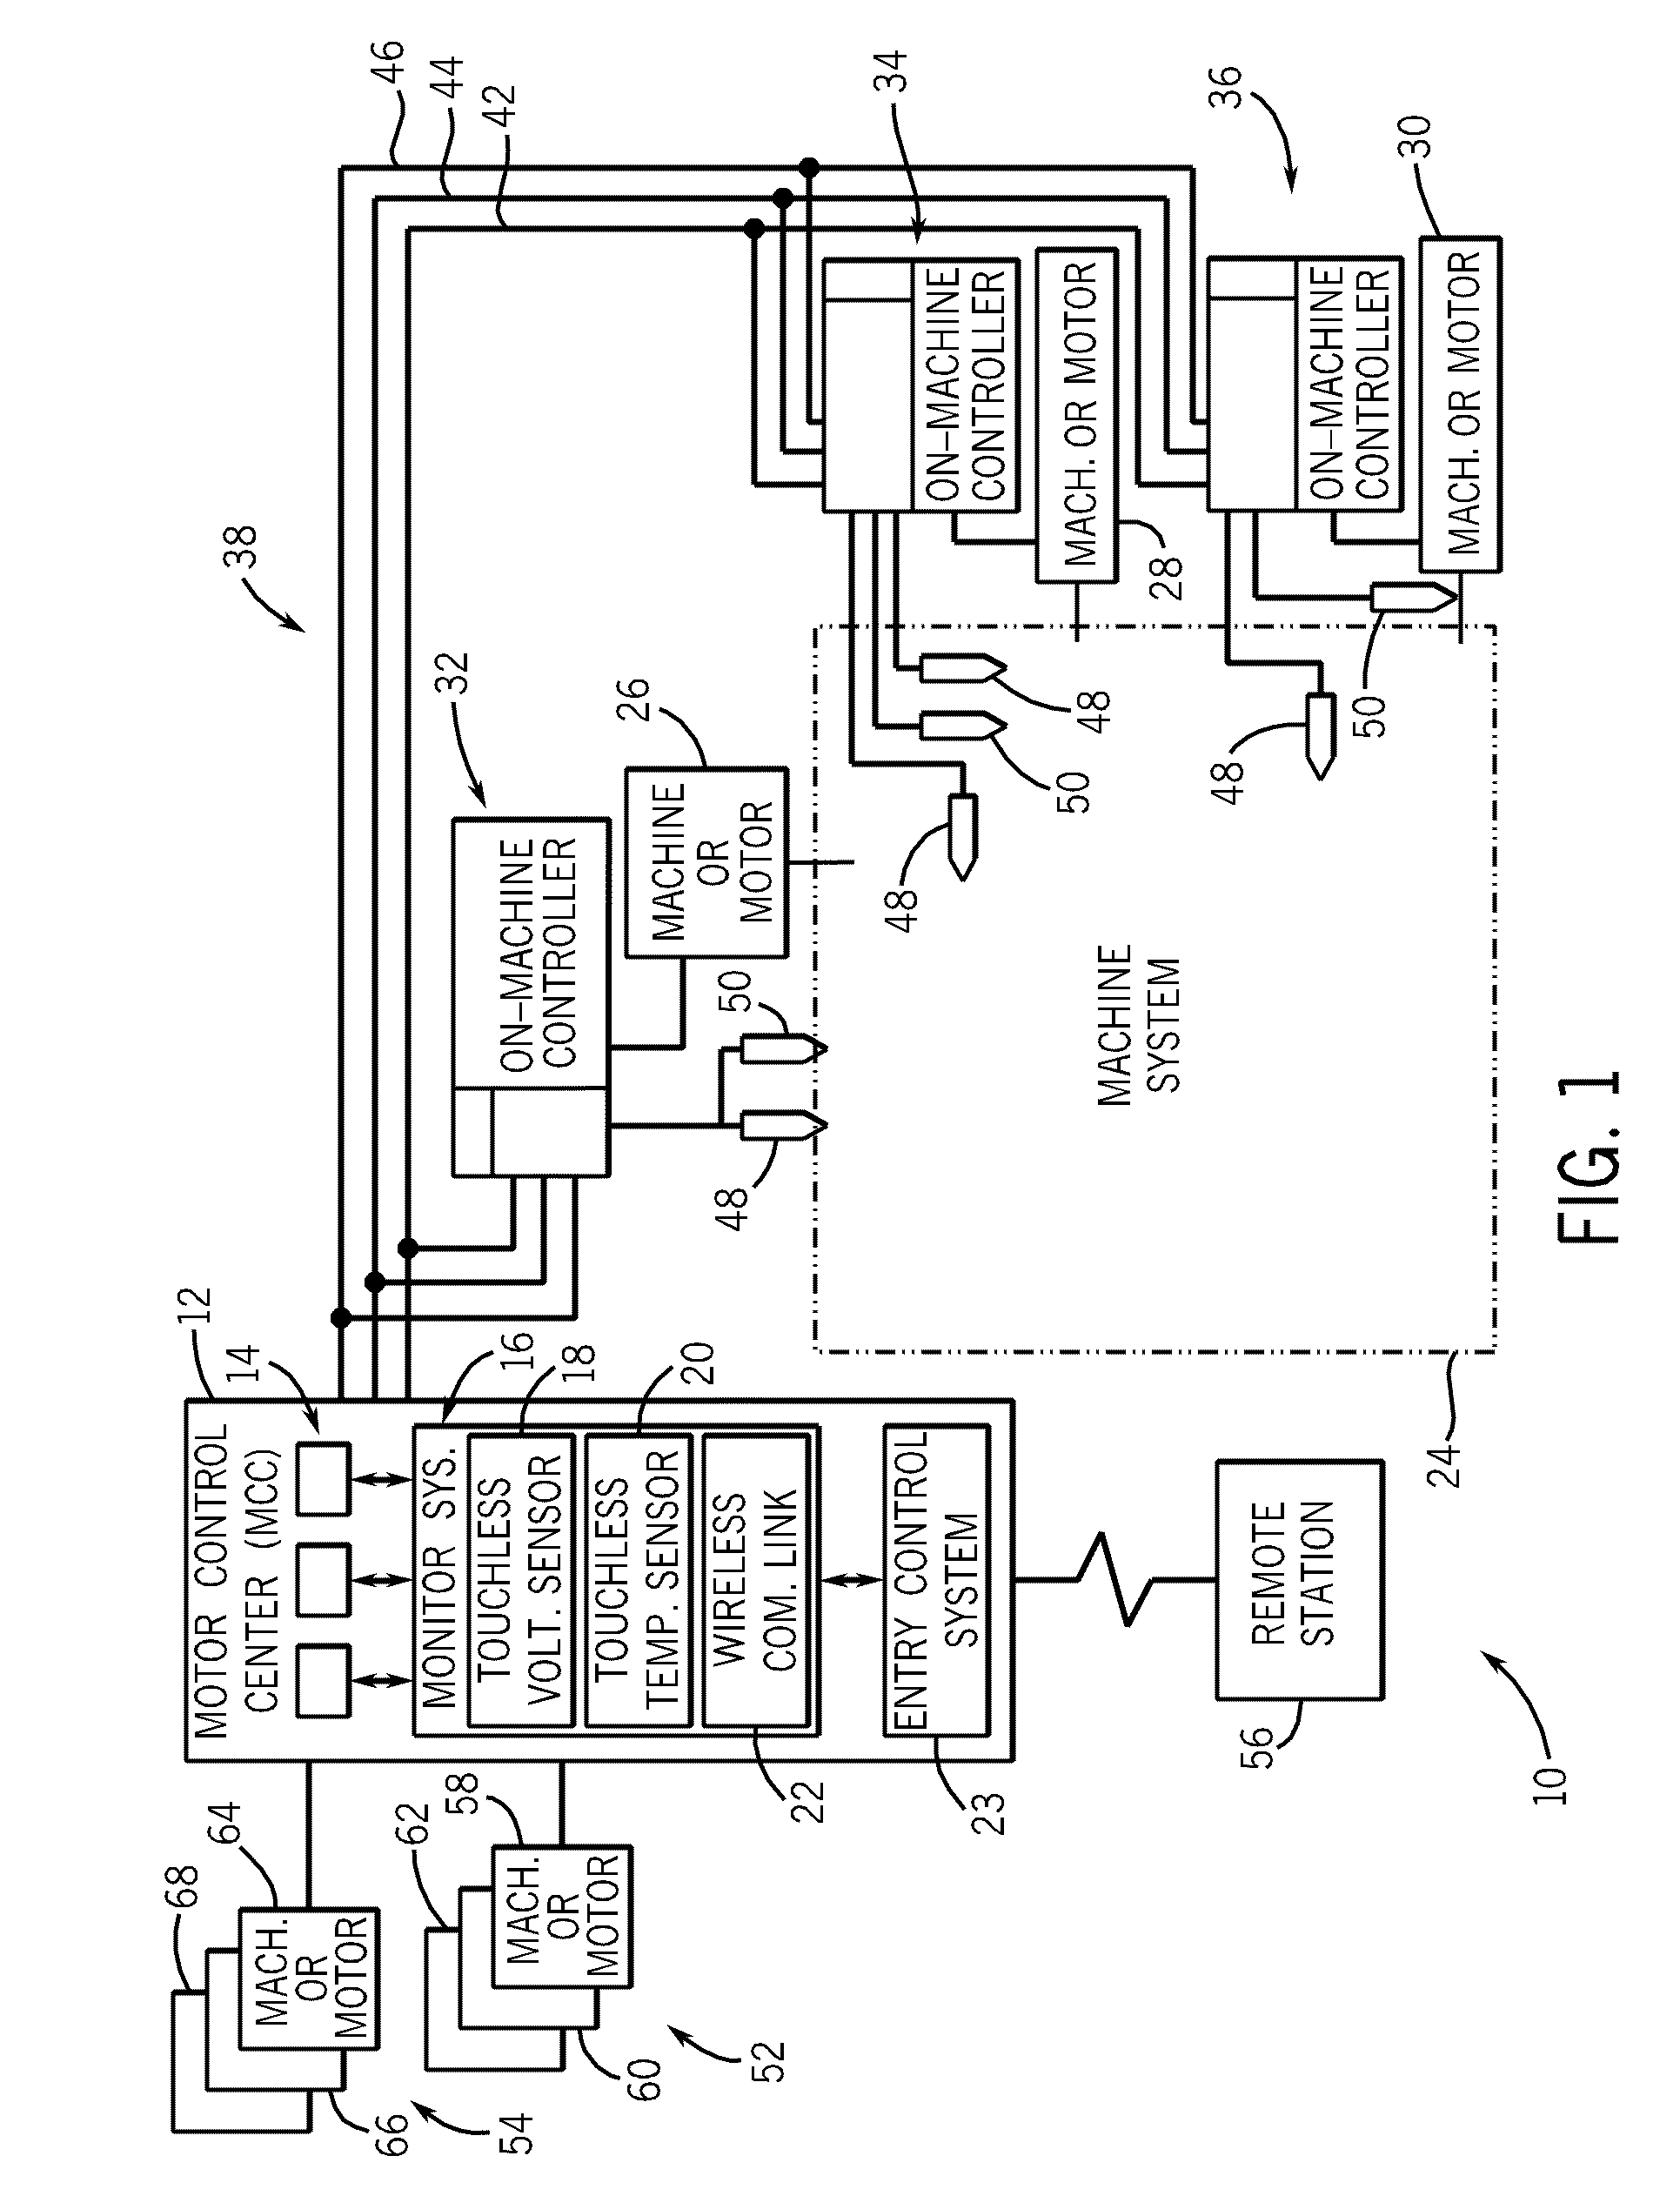 System and method for monitoring a motor control center